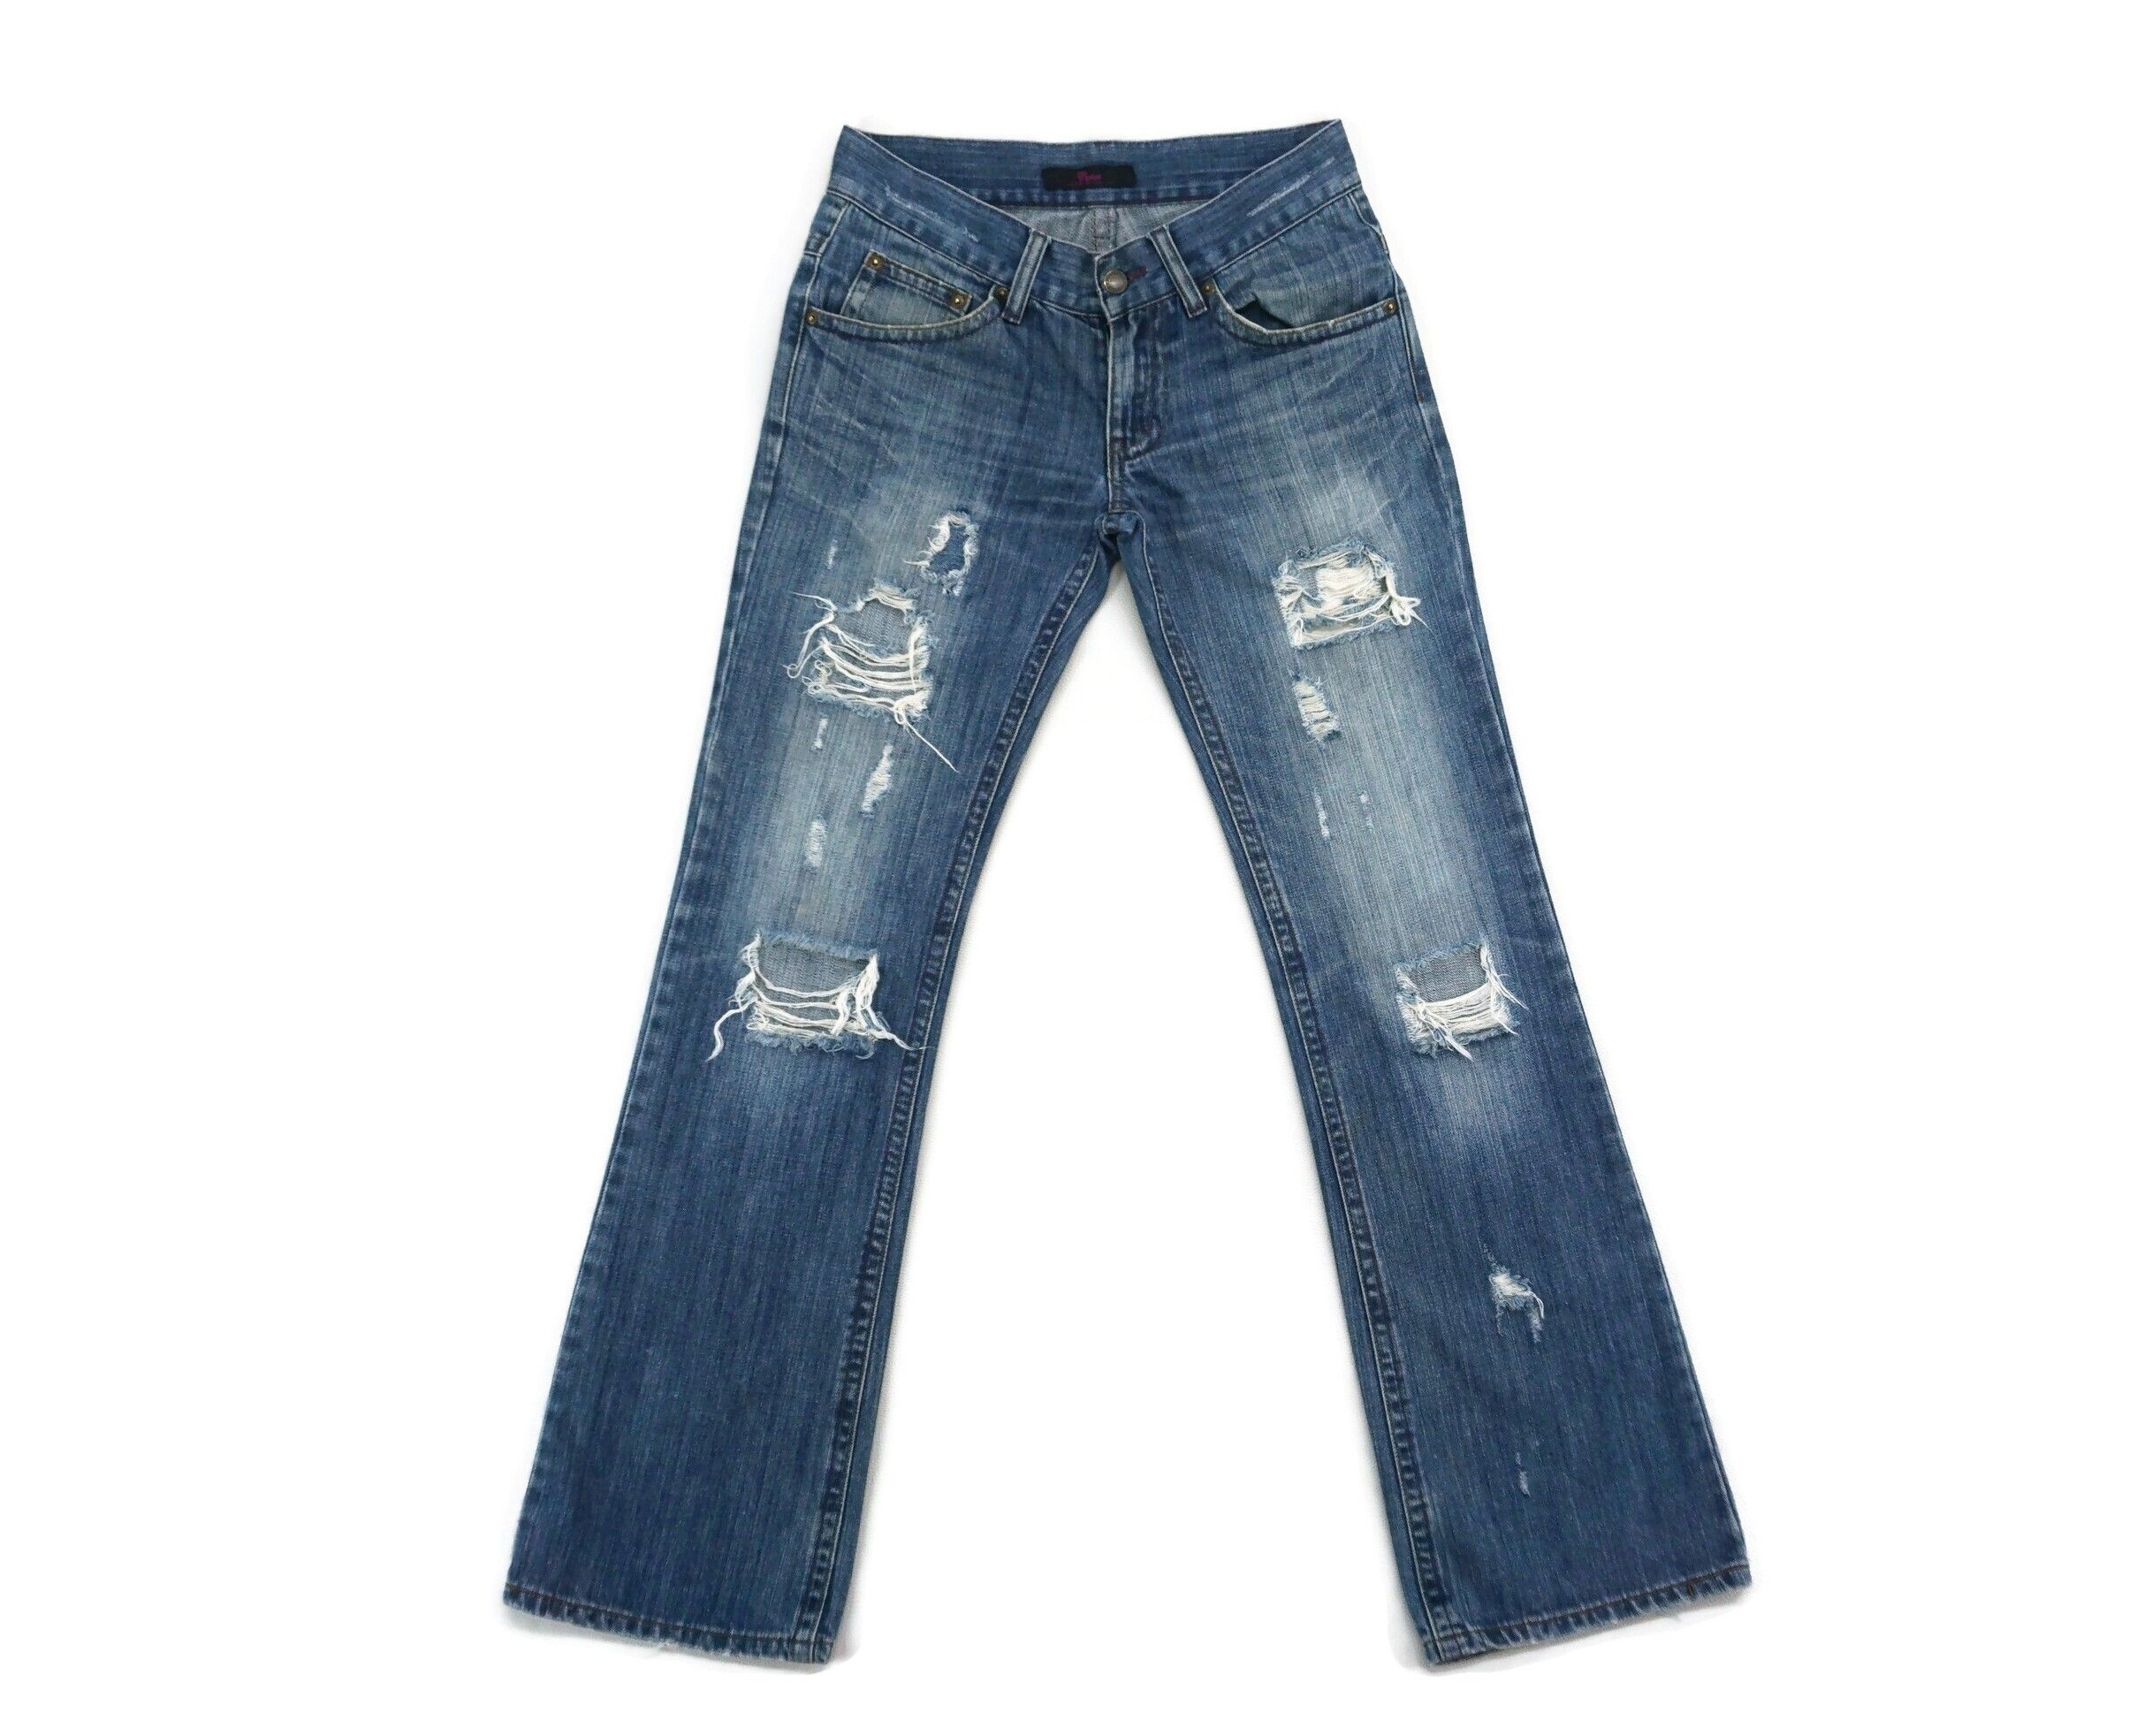 Distressed Denim Midas Jeans Bootcut Jeans Flare Jeans Japanese Distressed Size US 29 - 1 Preview